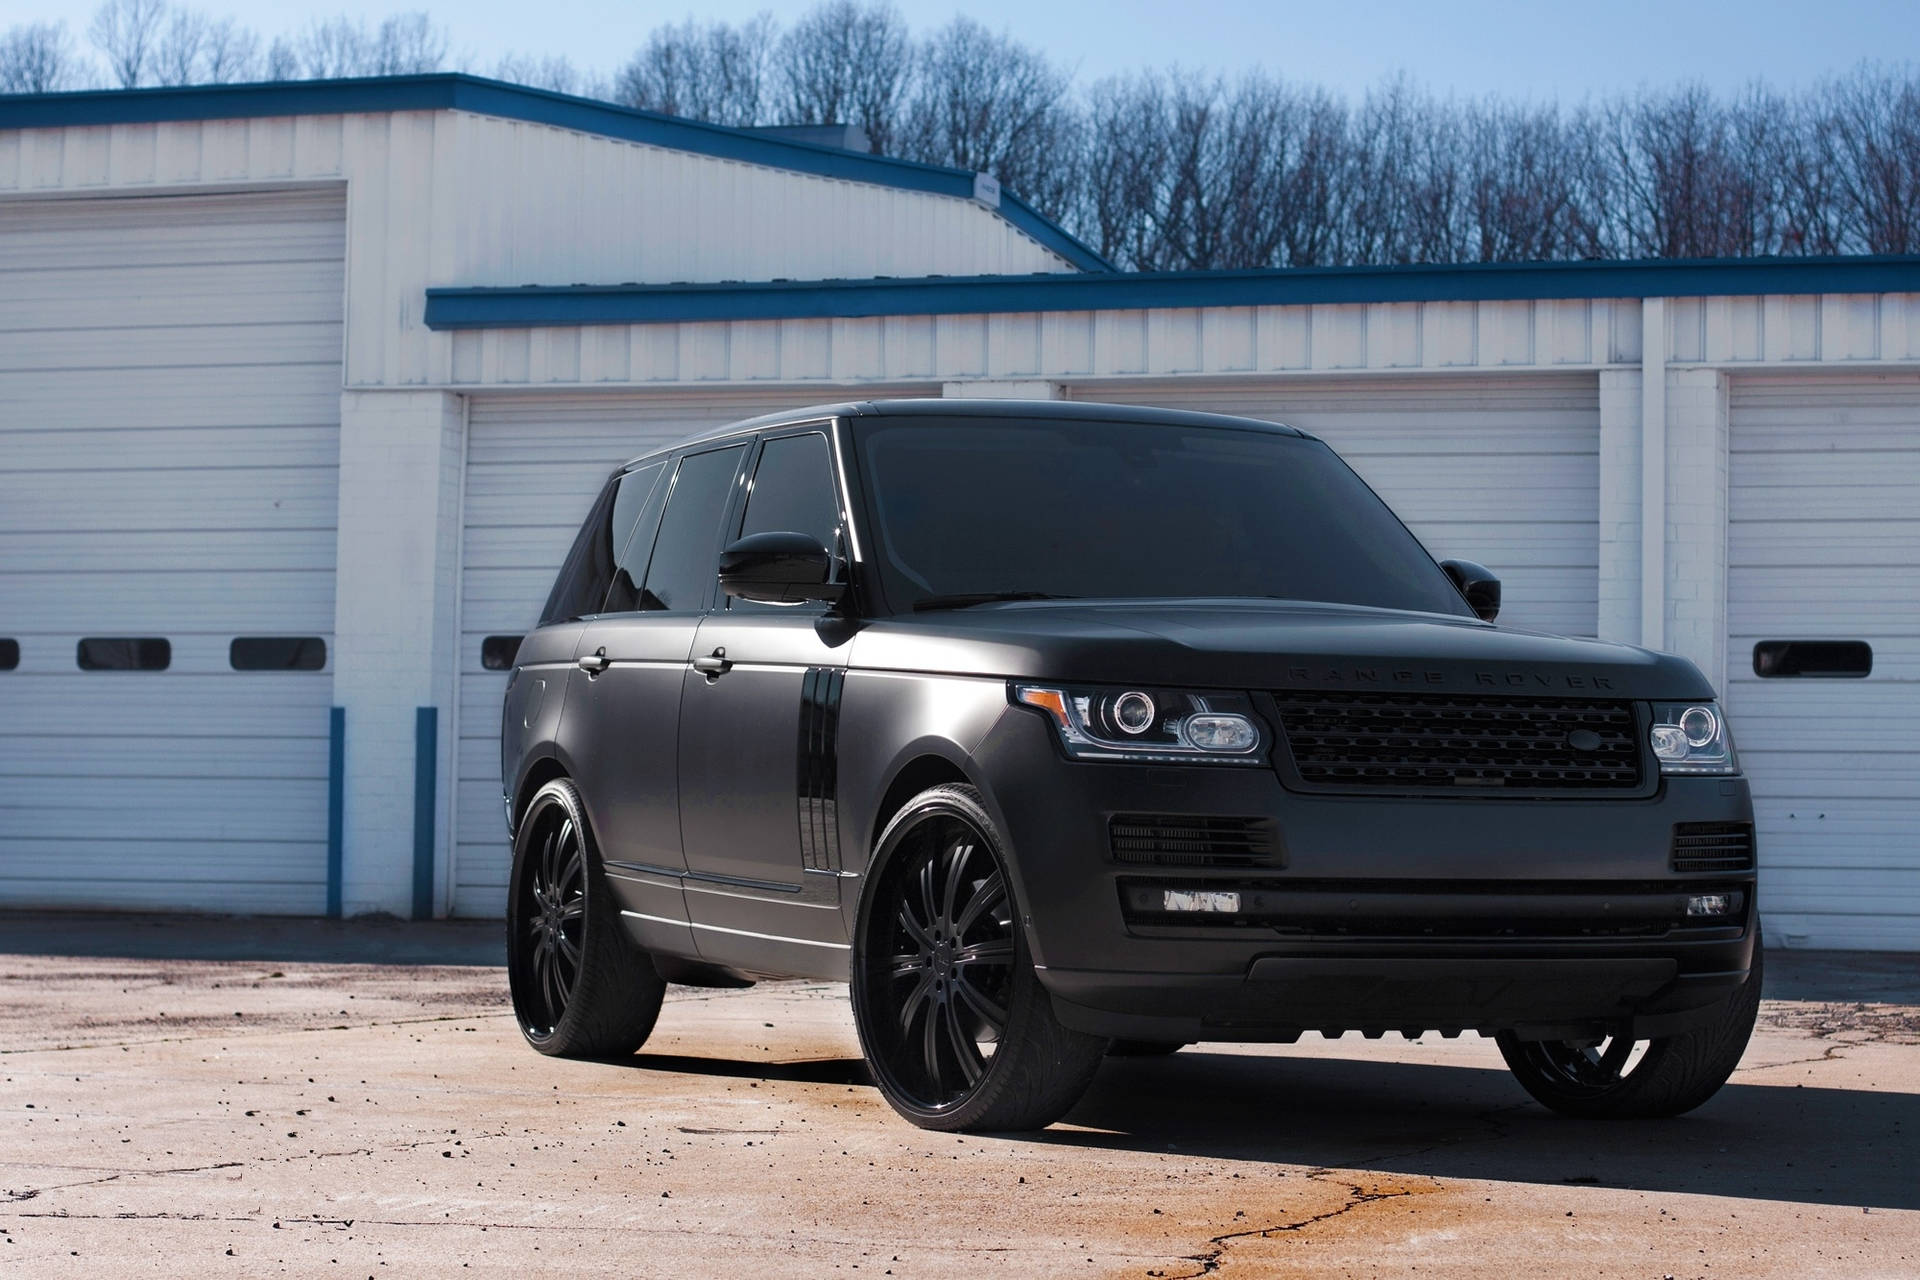 Charcoal Black Land Rover Picture